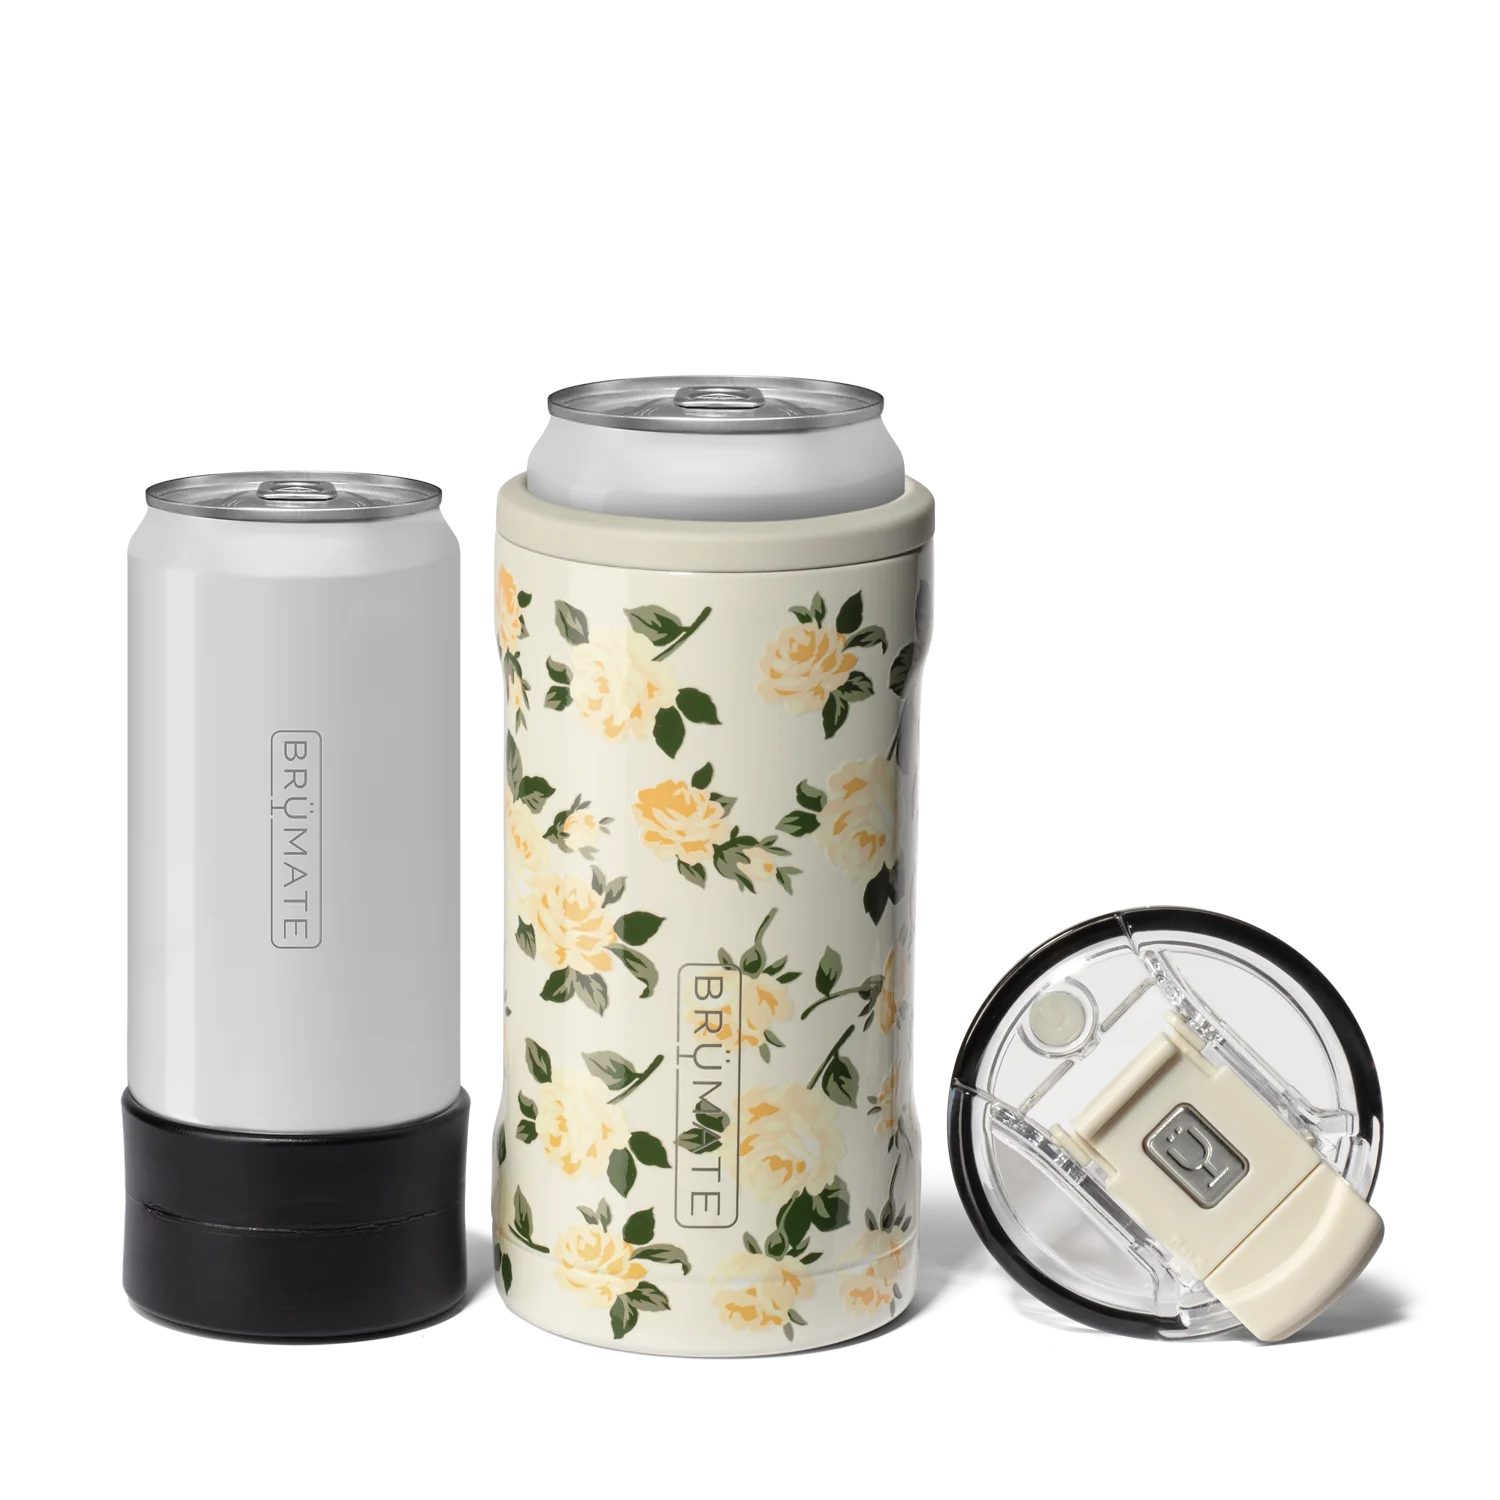 Off white with white flower pattern cylindrical can holder, alongside a black cylindrical can stand with a colour matched lid next to it